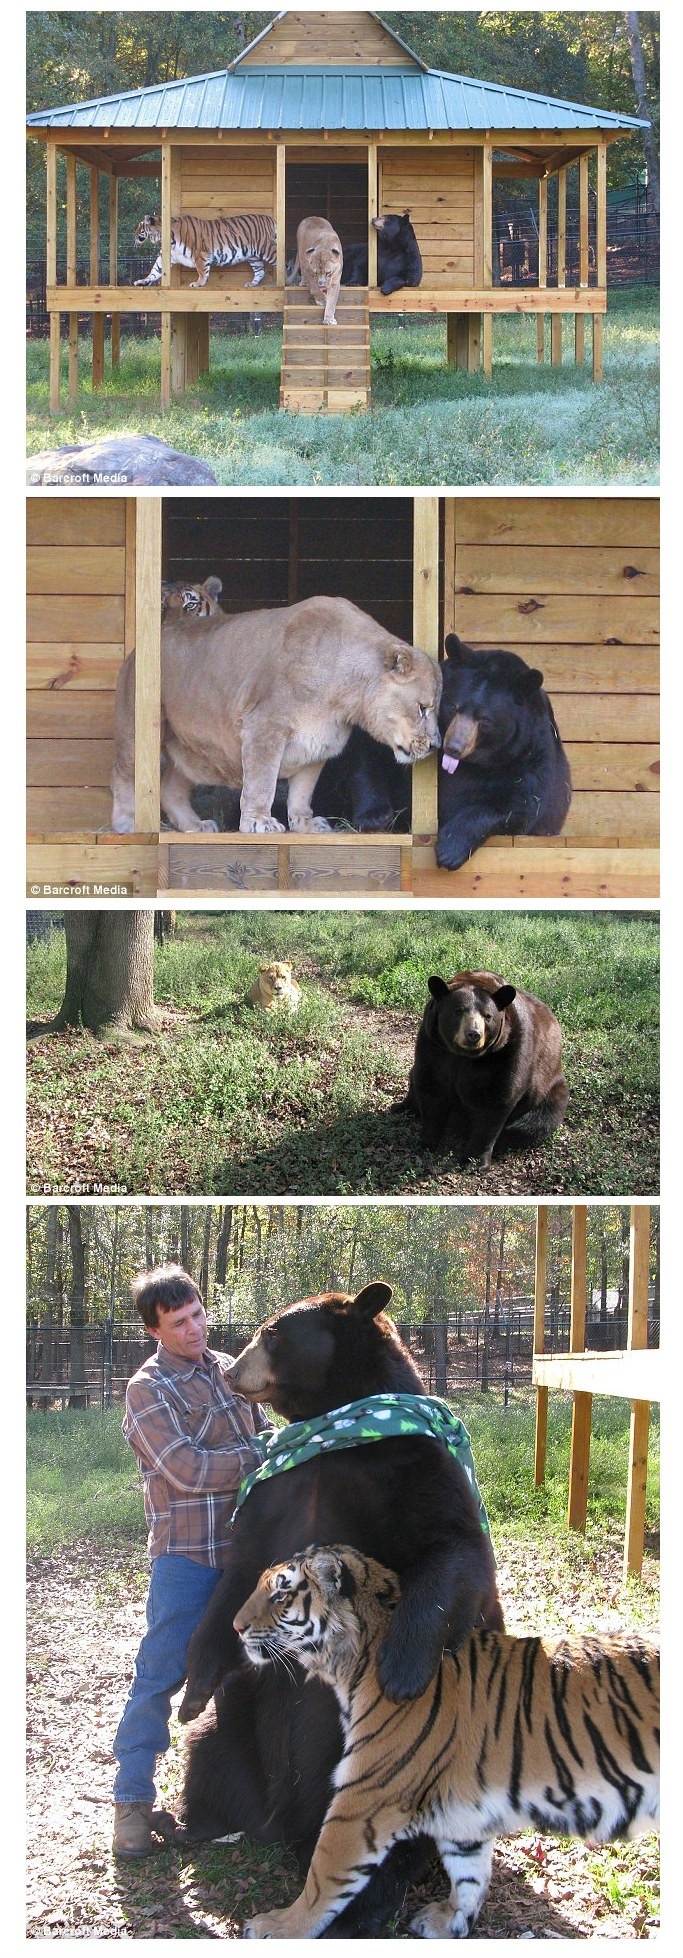 A lion, tiger, and bear raised together in the same enclosure at Noah's Ark Sanctuary in GA play ball, cuddle, and chase each other.